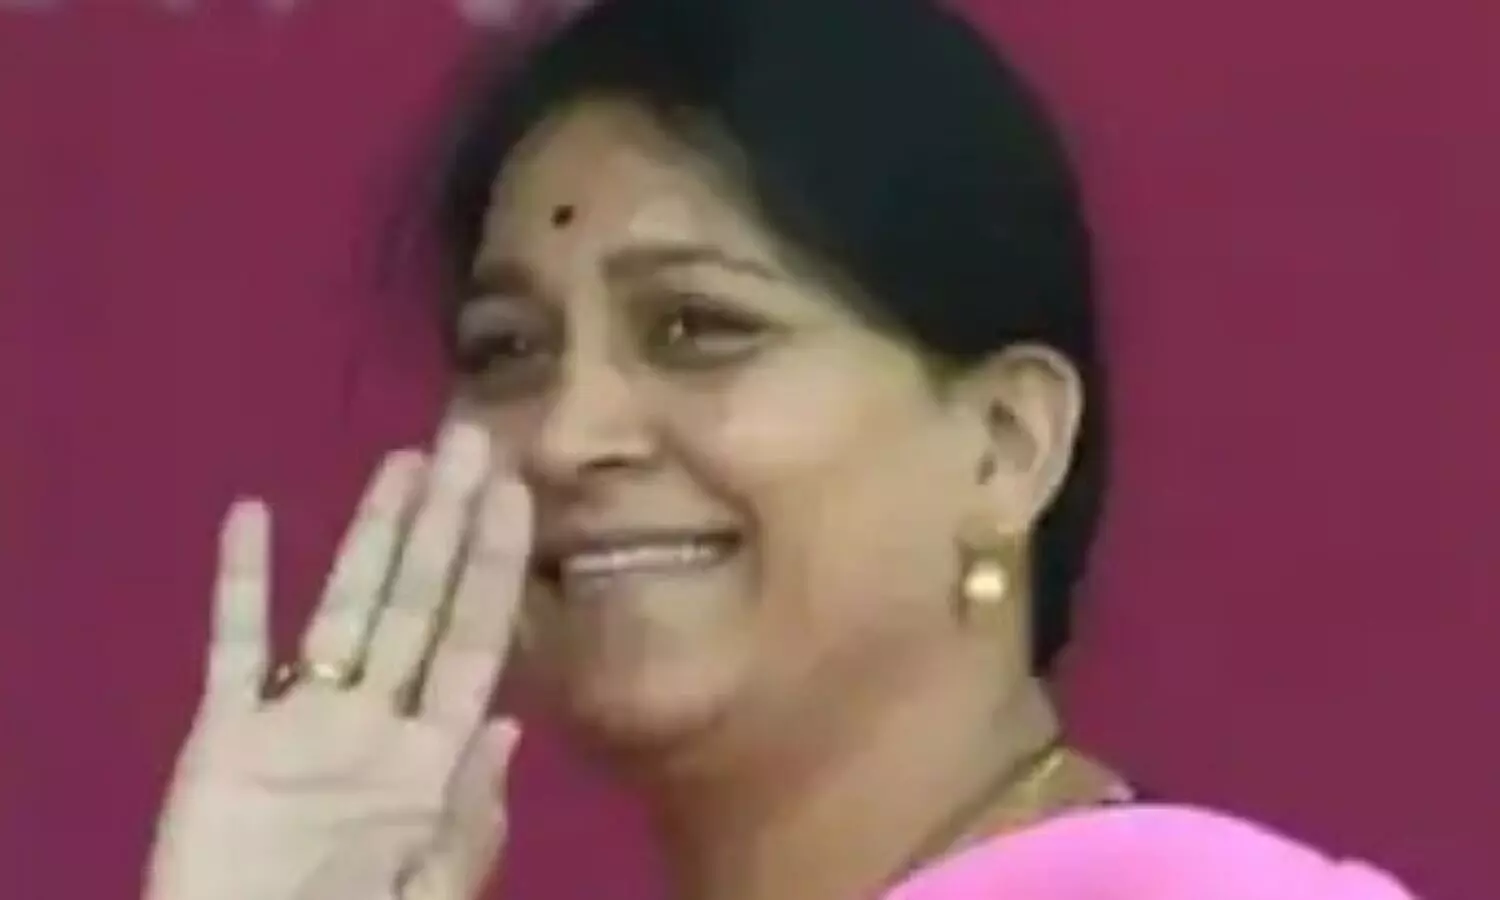 Court sentenced TRS MP Malout Kavita to 6 months imprisonment